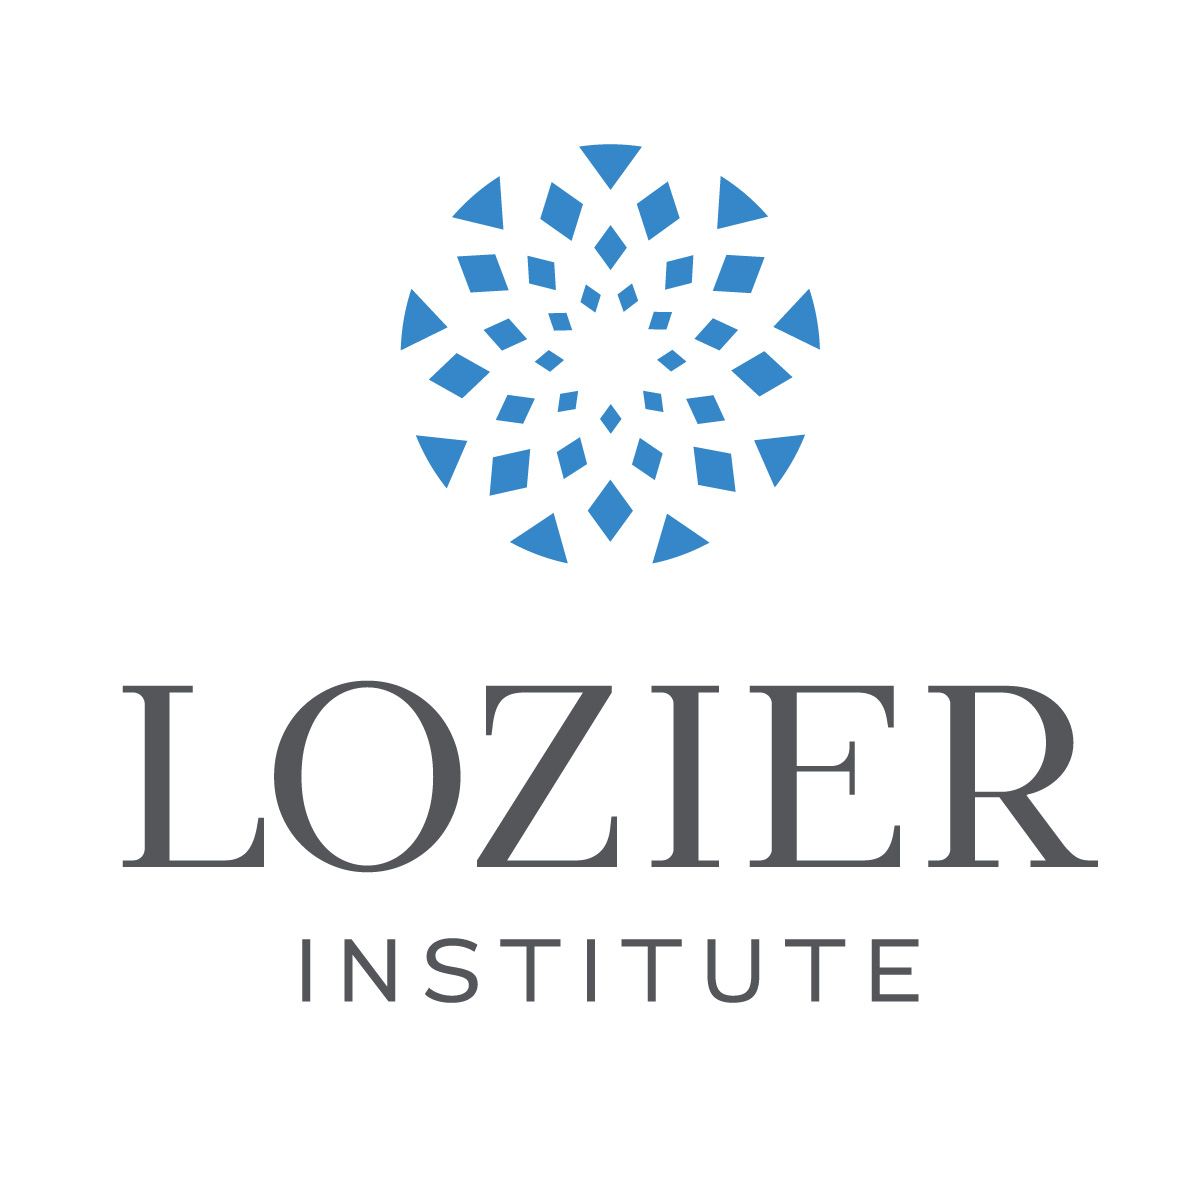 Dr. David Prentice Joins the Charlotte Lozier Institute as VP and Research Director